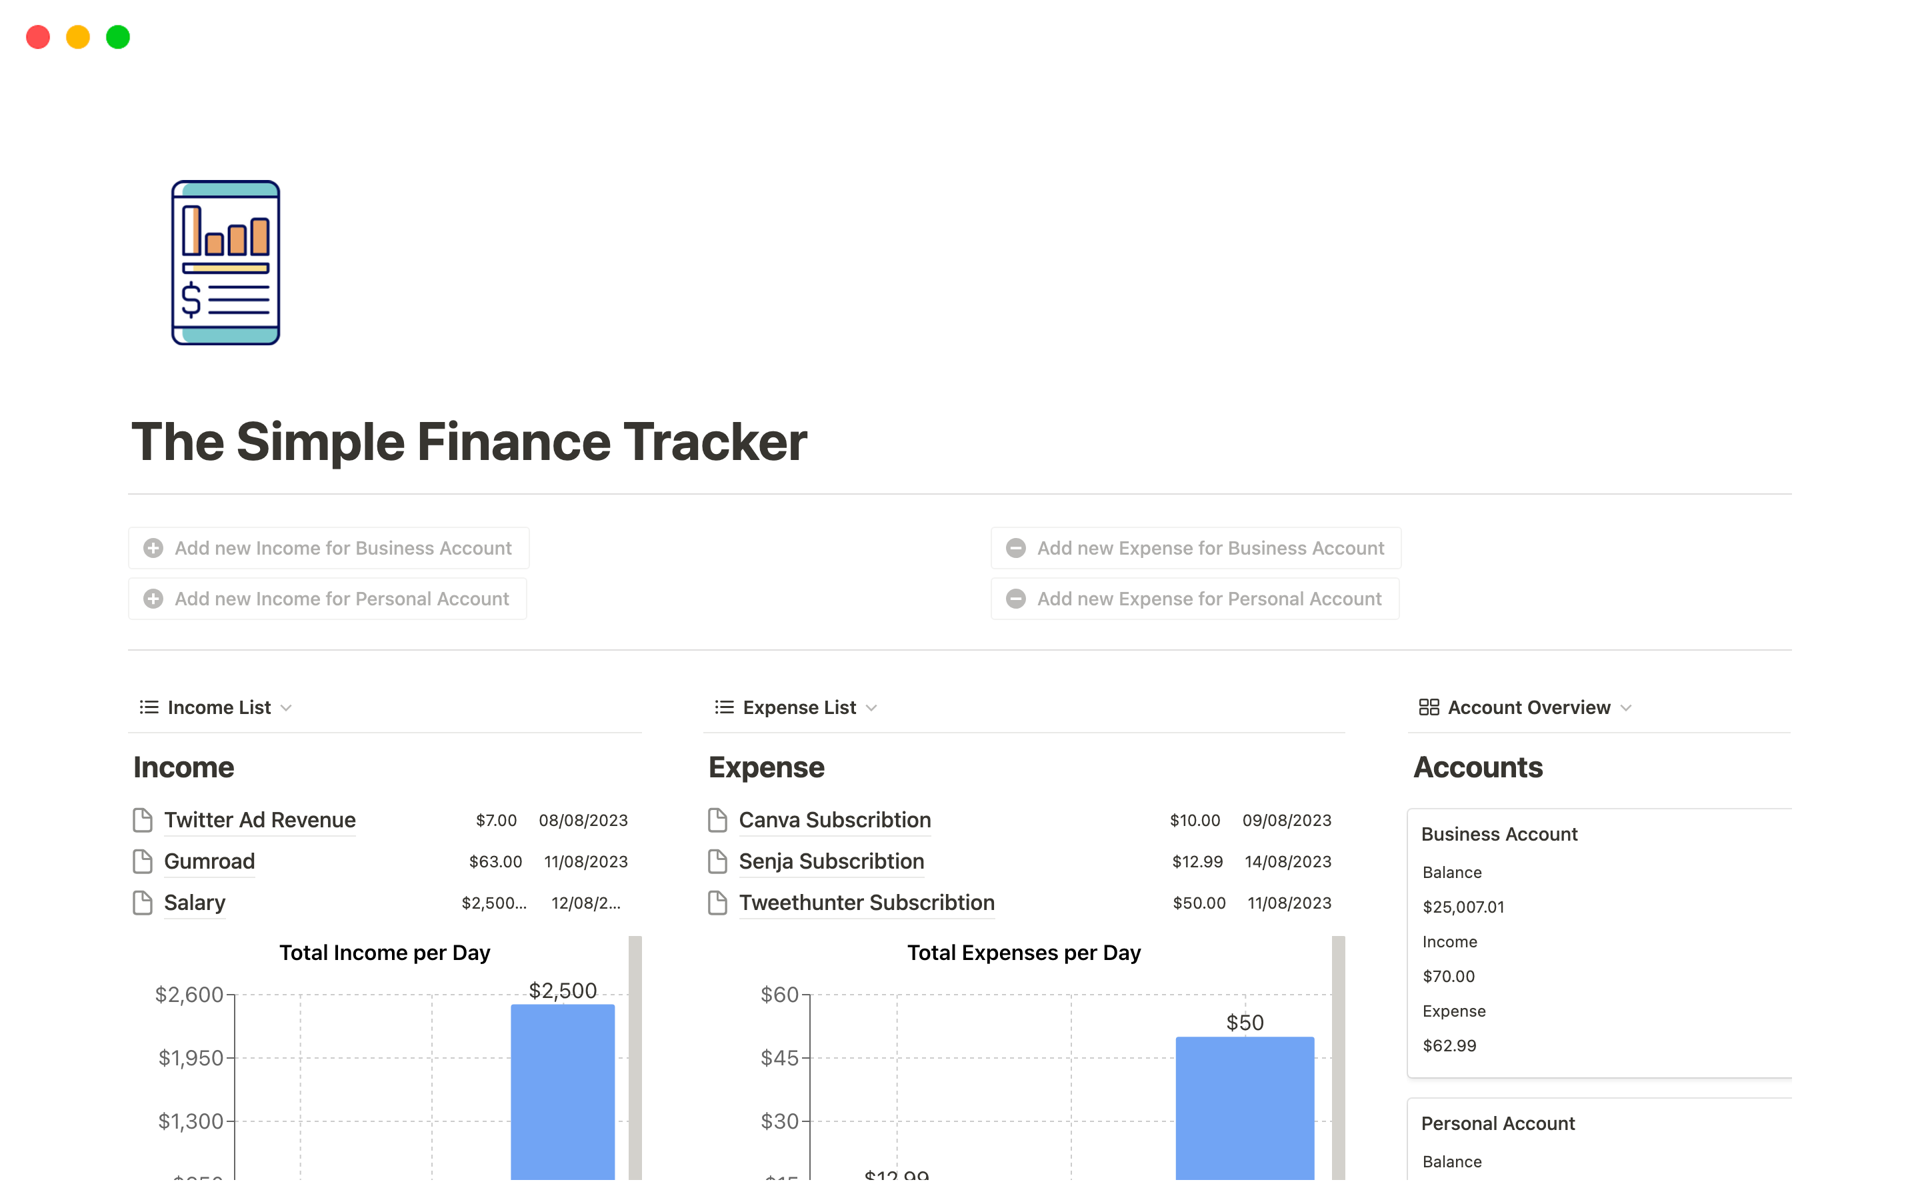 Effortless Money Management with The Simple Finance Tracker💵
Finance tracking has never been easier!